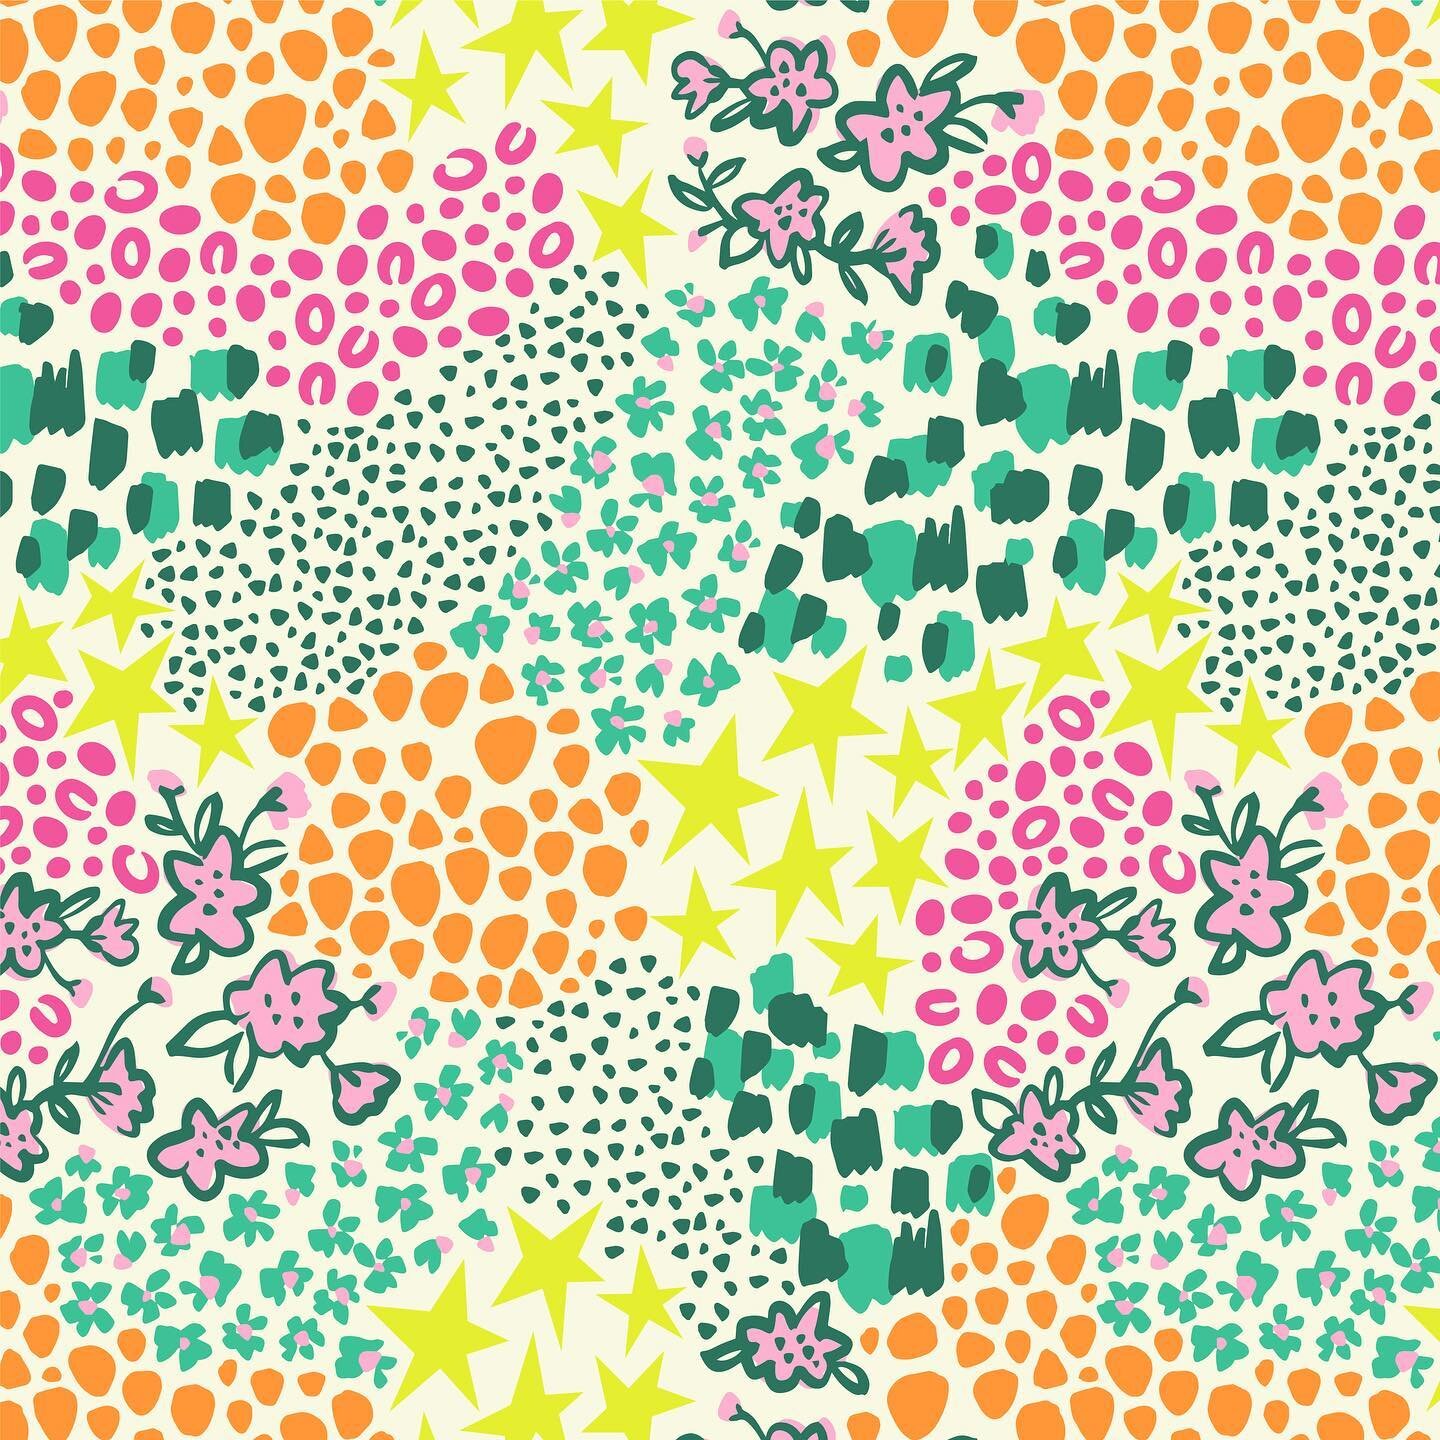 Sad to see #thepatternchallengebymel coming to an end 💔 the final prompt is &ldquo;joy.&rdquo; Filled this print up with a pattern clash of all of the joyful shapes, marks, and colors!!